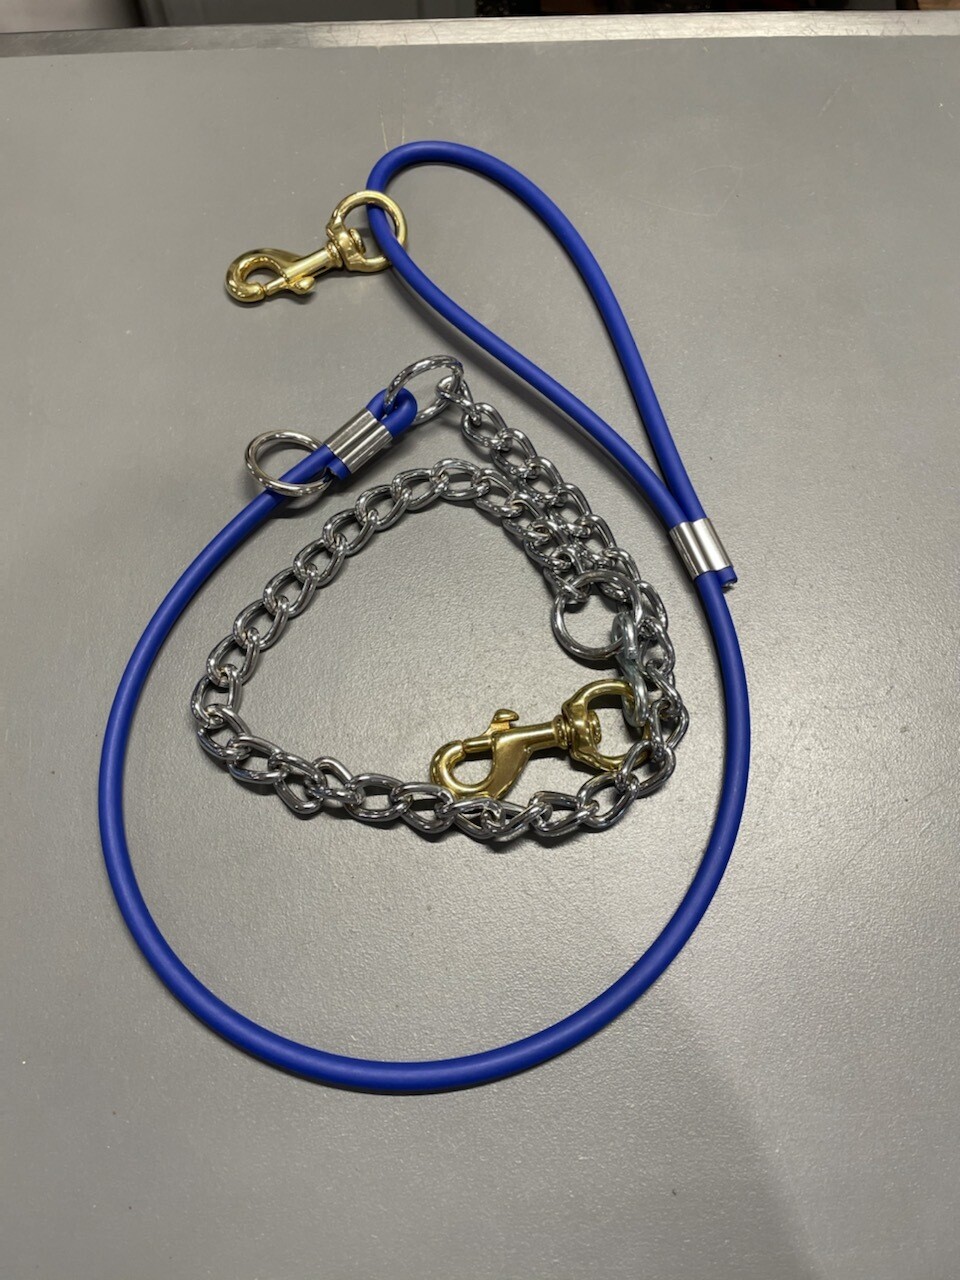 Beta rope and chain lead